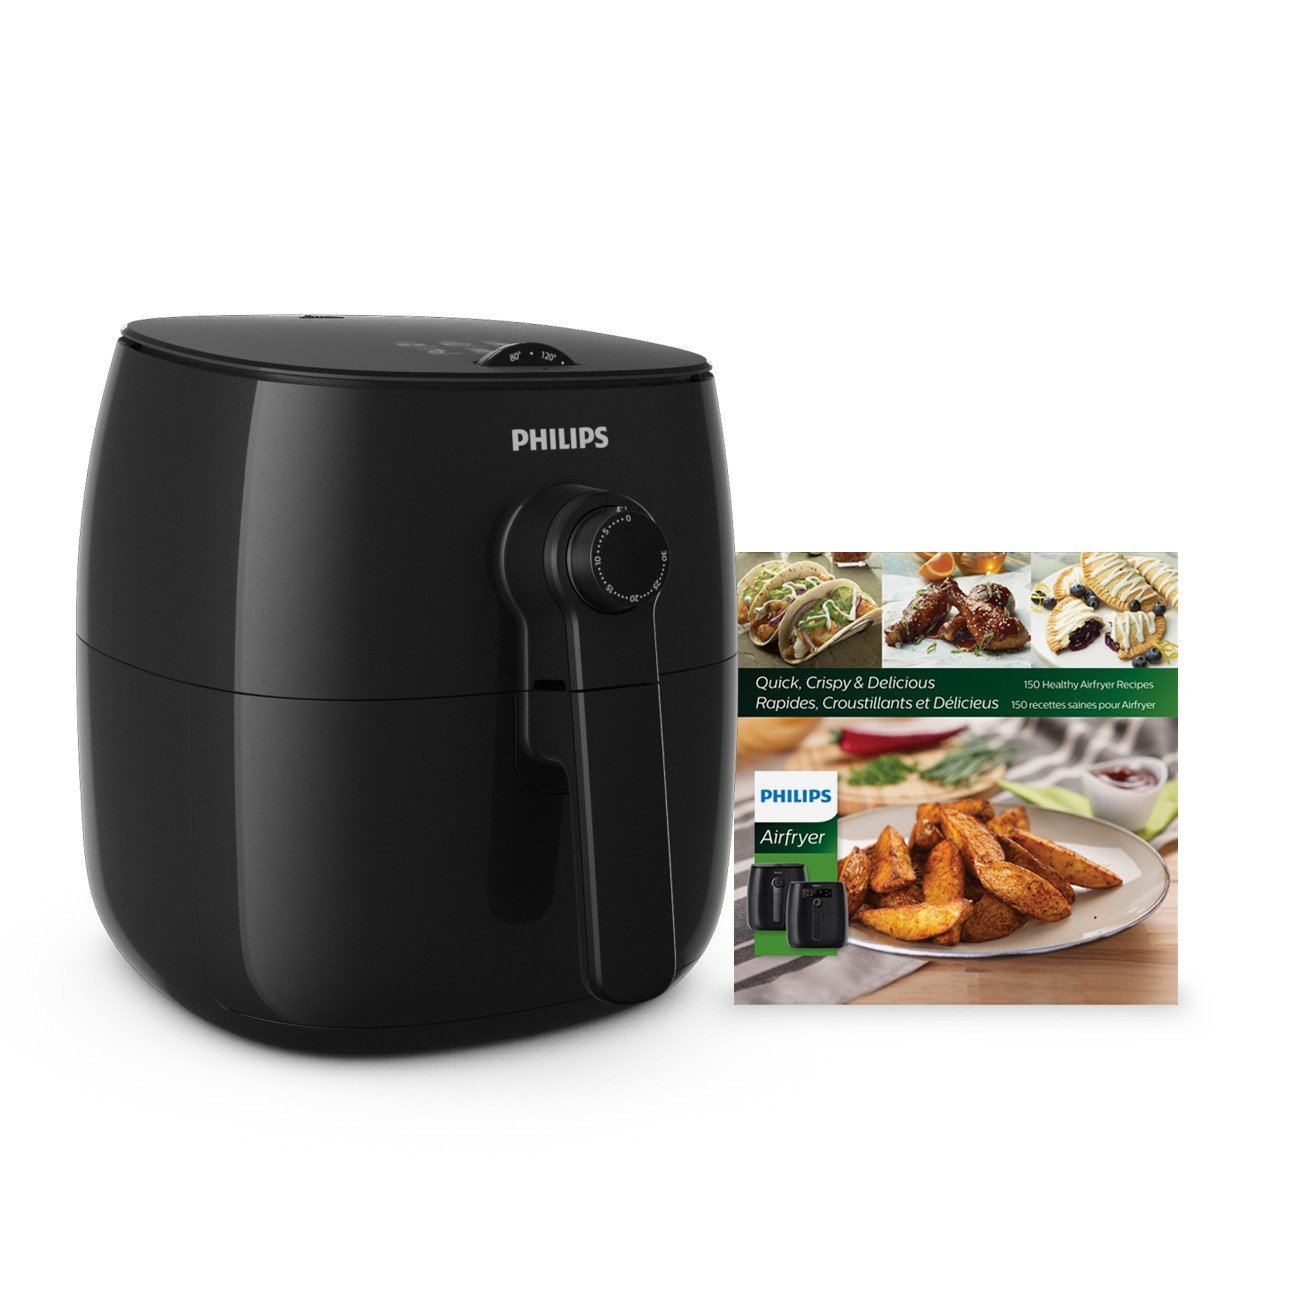 Today only: Philips TurboStar airfryer for $120